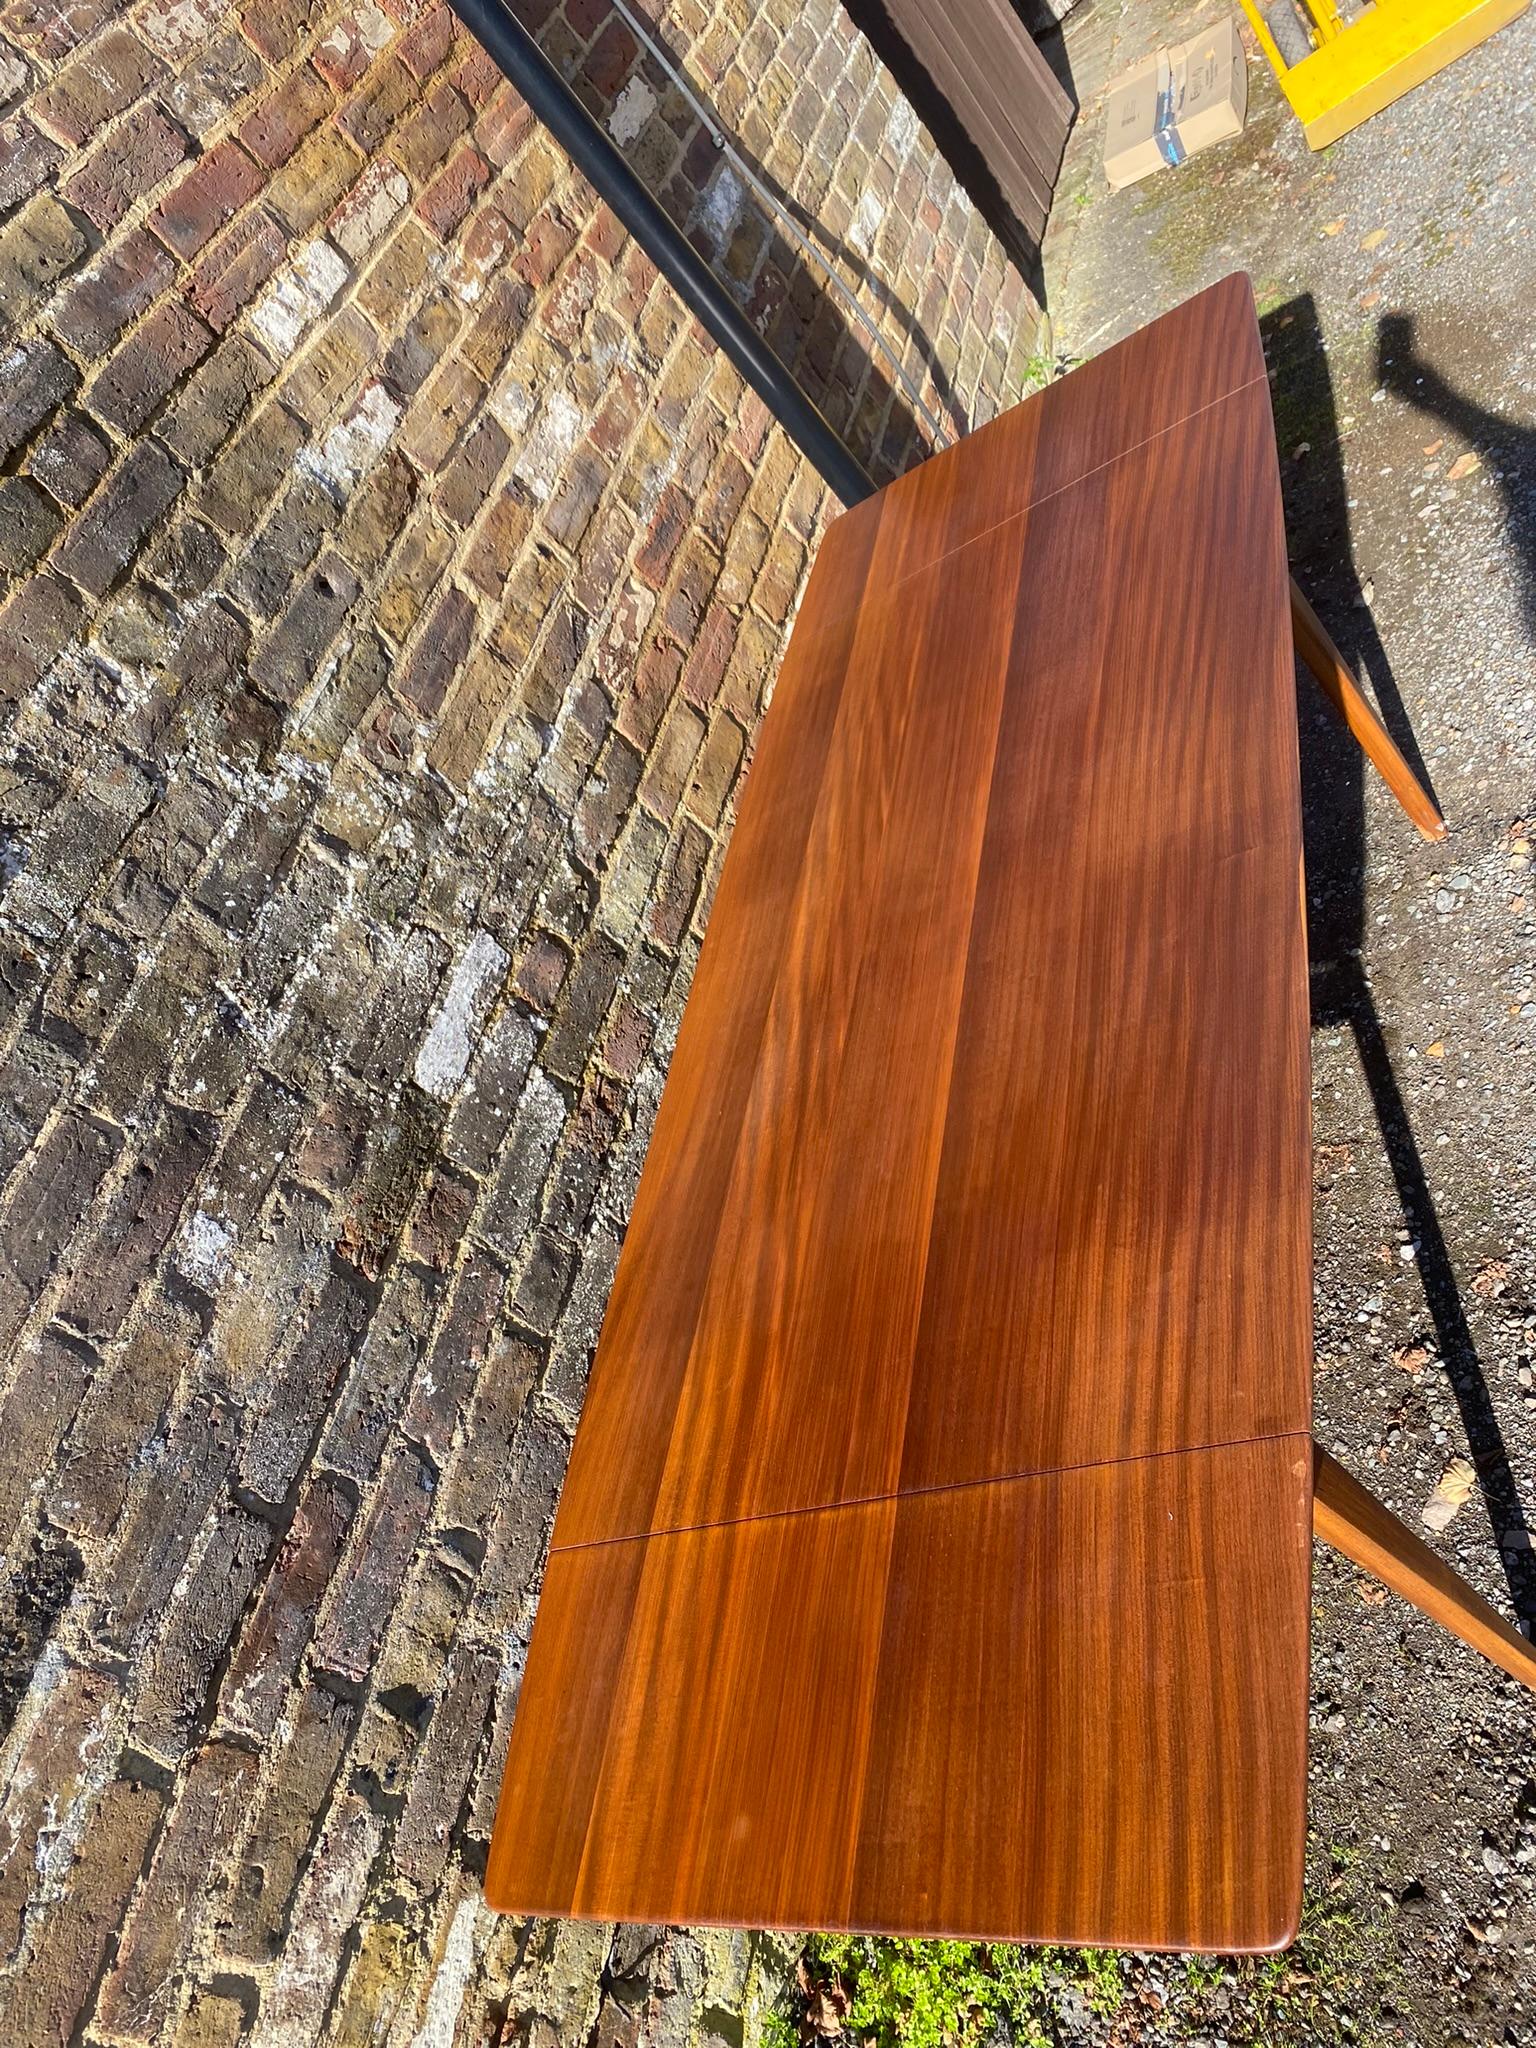 Lacquered Mid-Century Afromosia Teak Drop-Leaf Dining Table, Denmark, 1960s For Sale